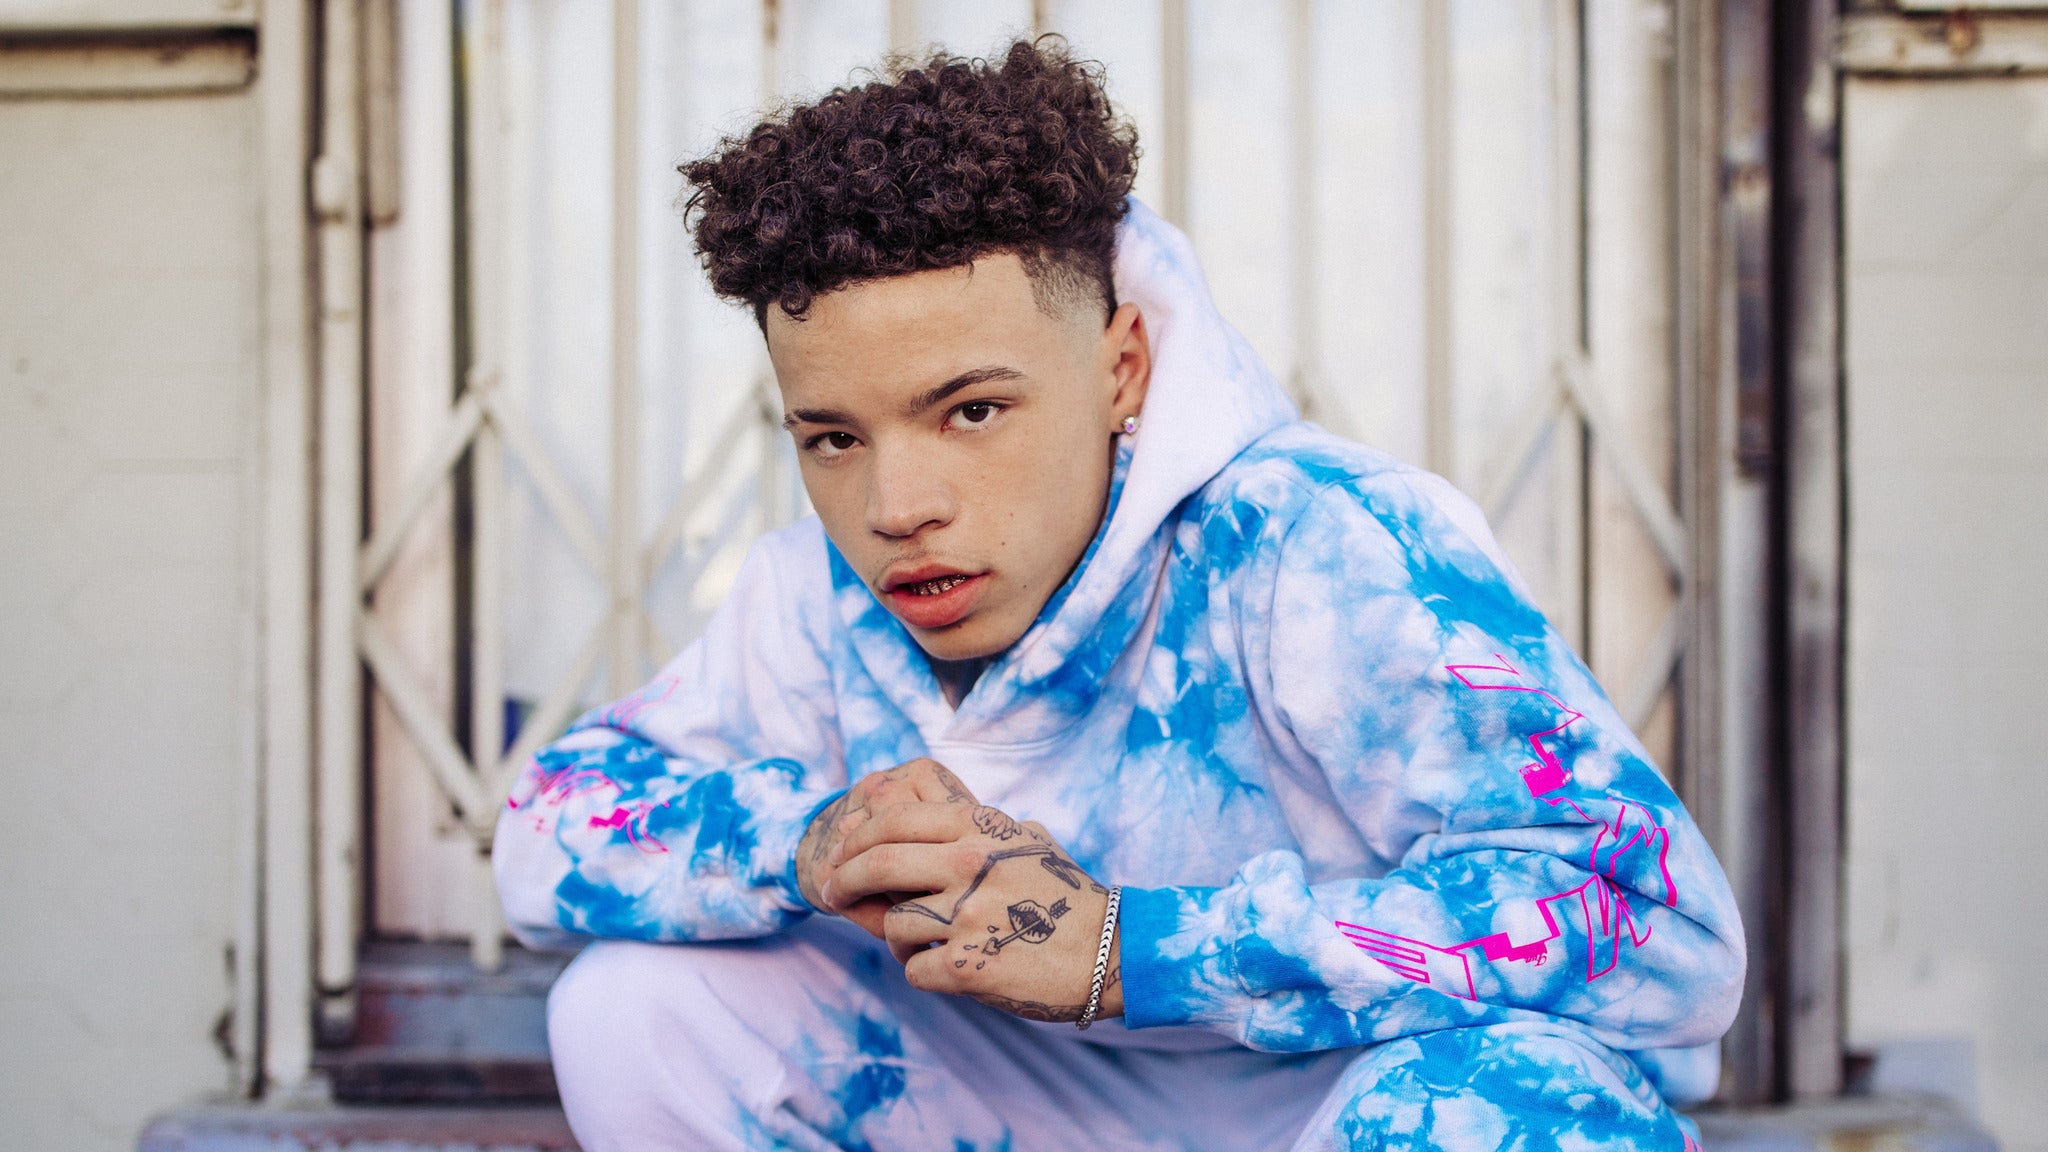 Lil Mosey - Certified Hitmaker North American Tour 2020 in Sacramento promo photo for Official Platinum presale offer code